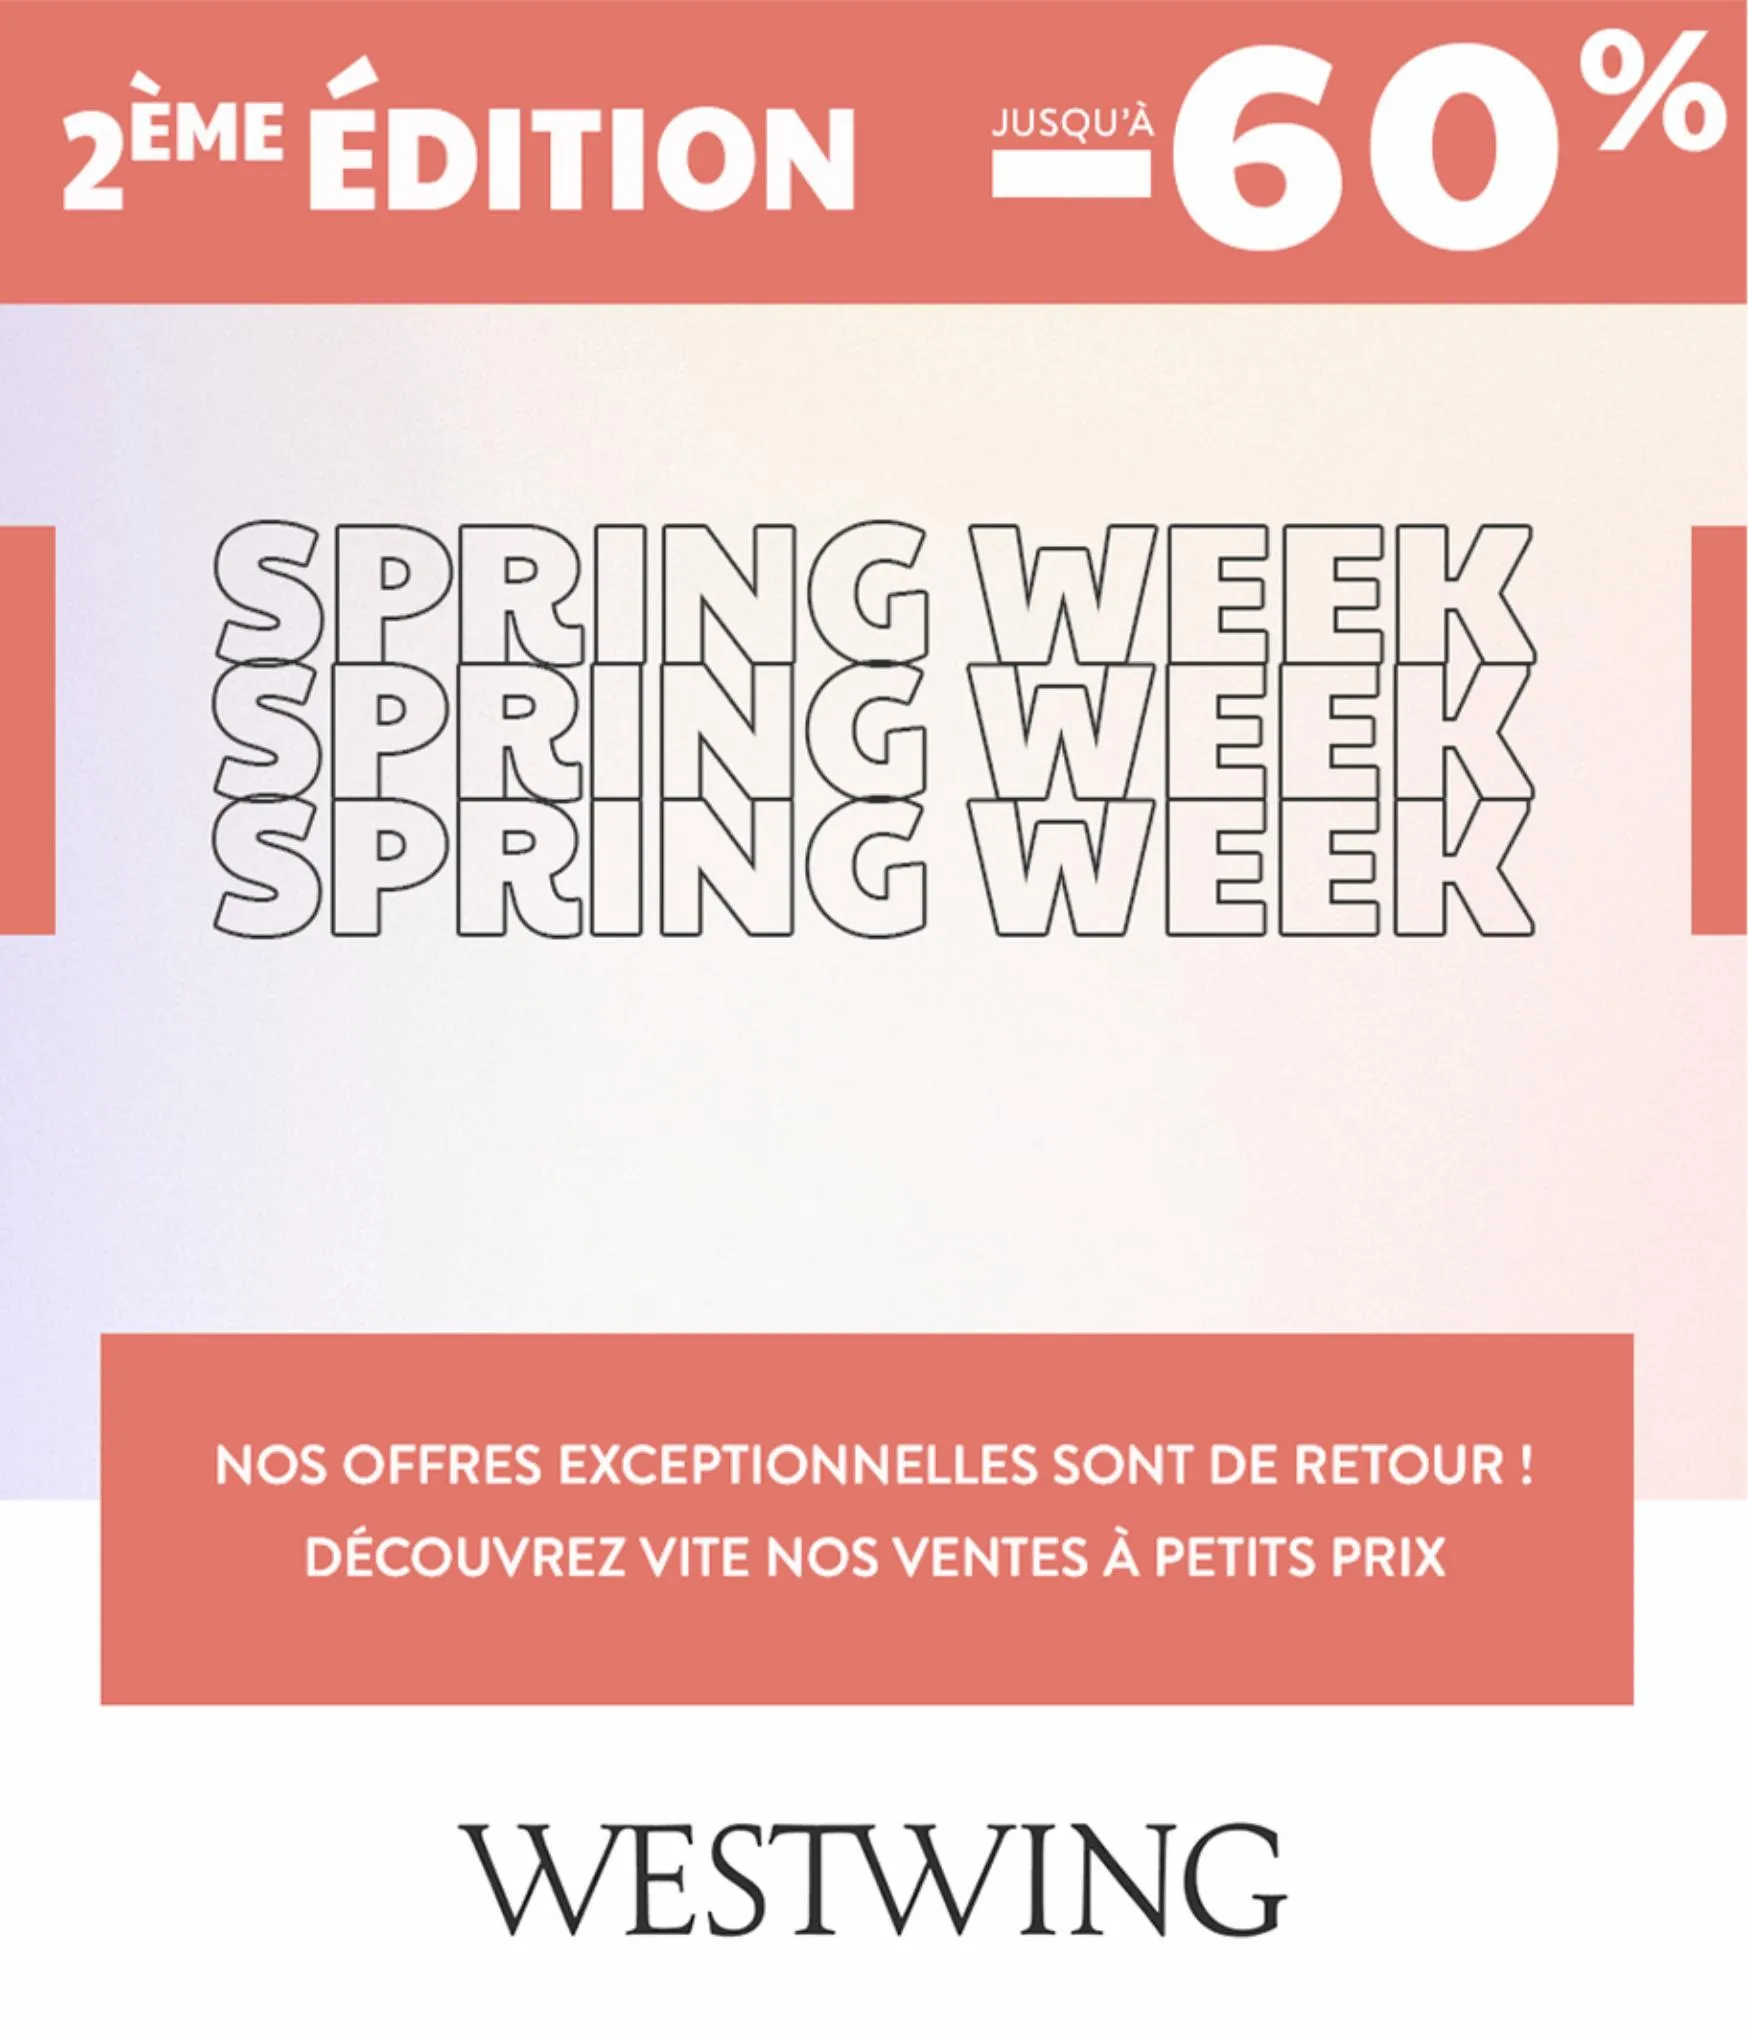 Catalogue Spring Week -60%, page 00001